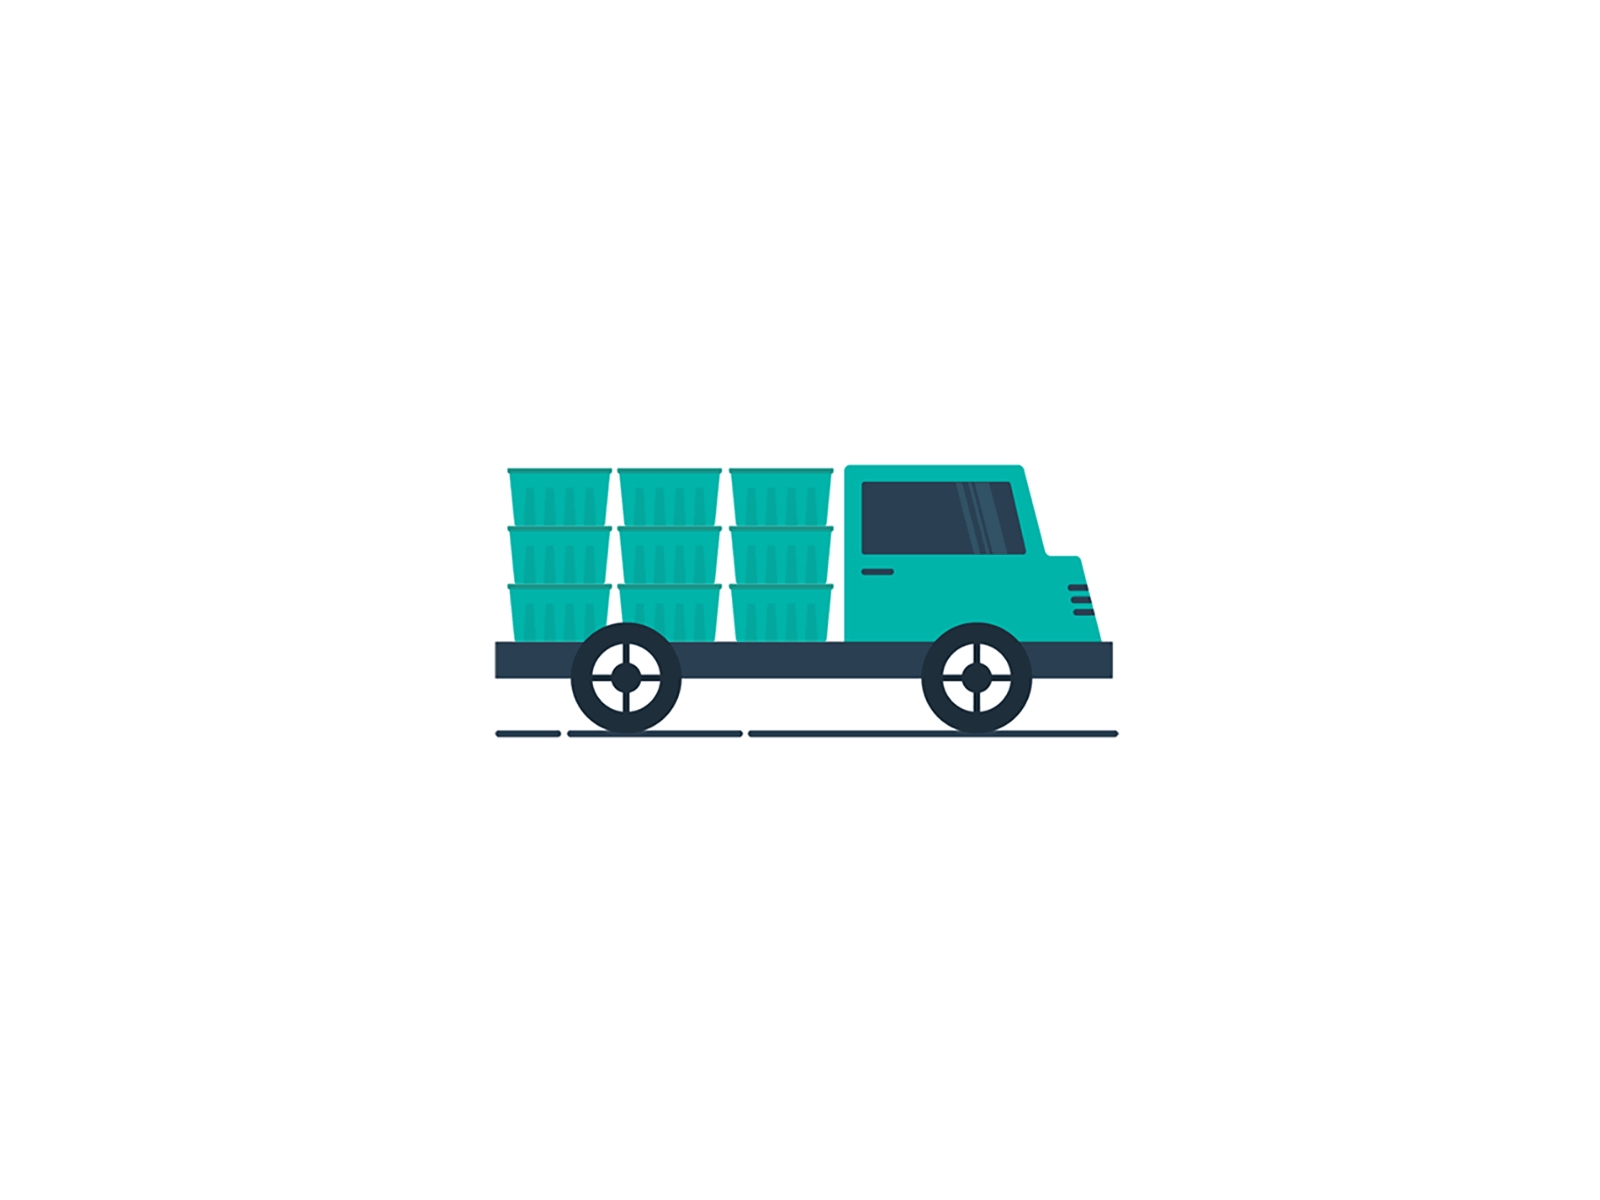 Moving Truck by Maple on Dribbble